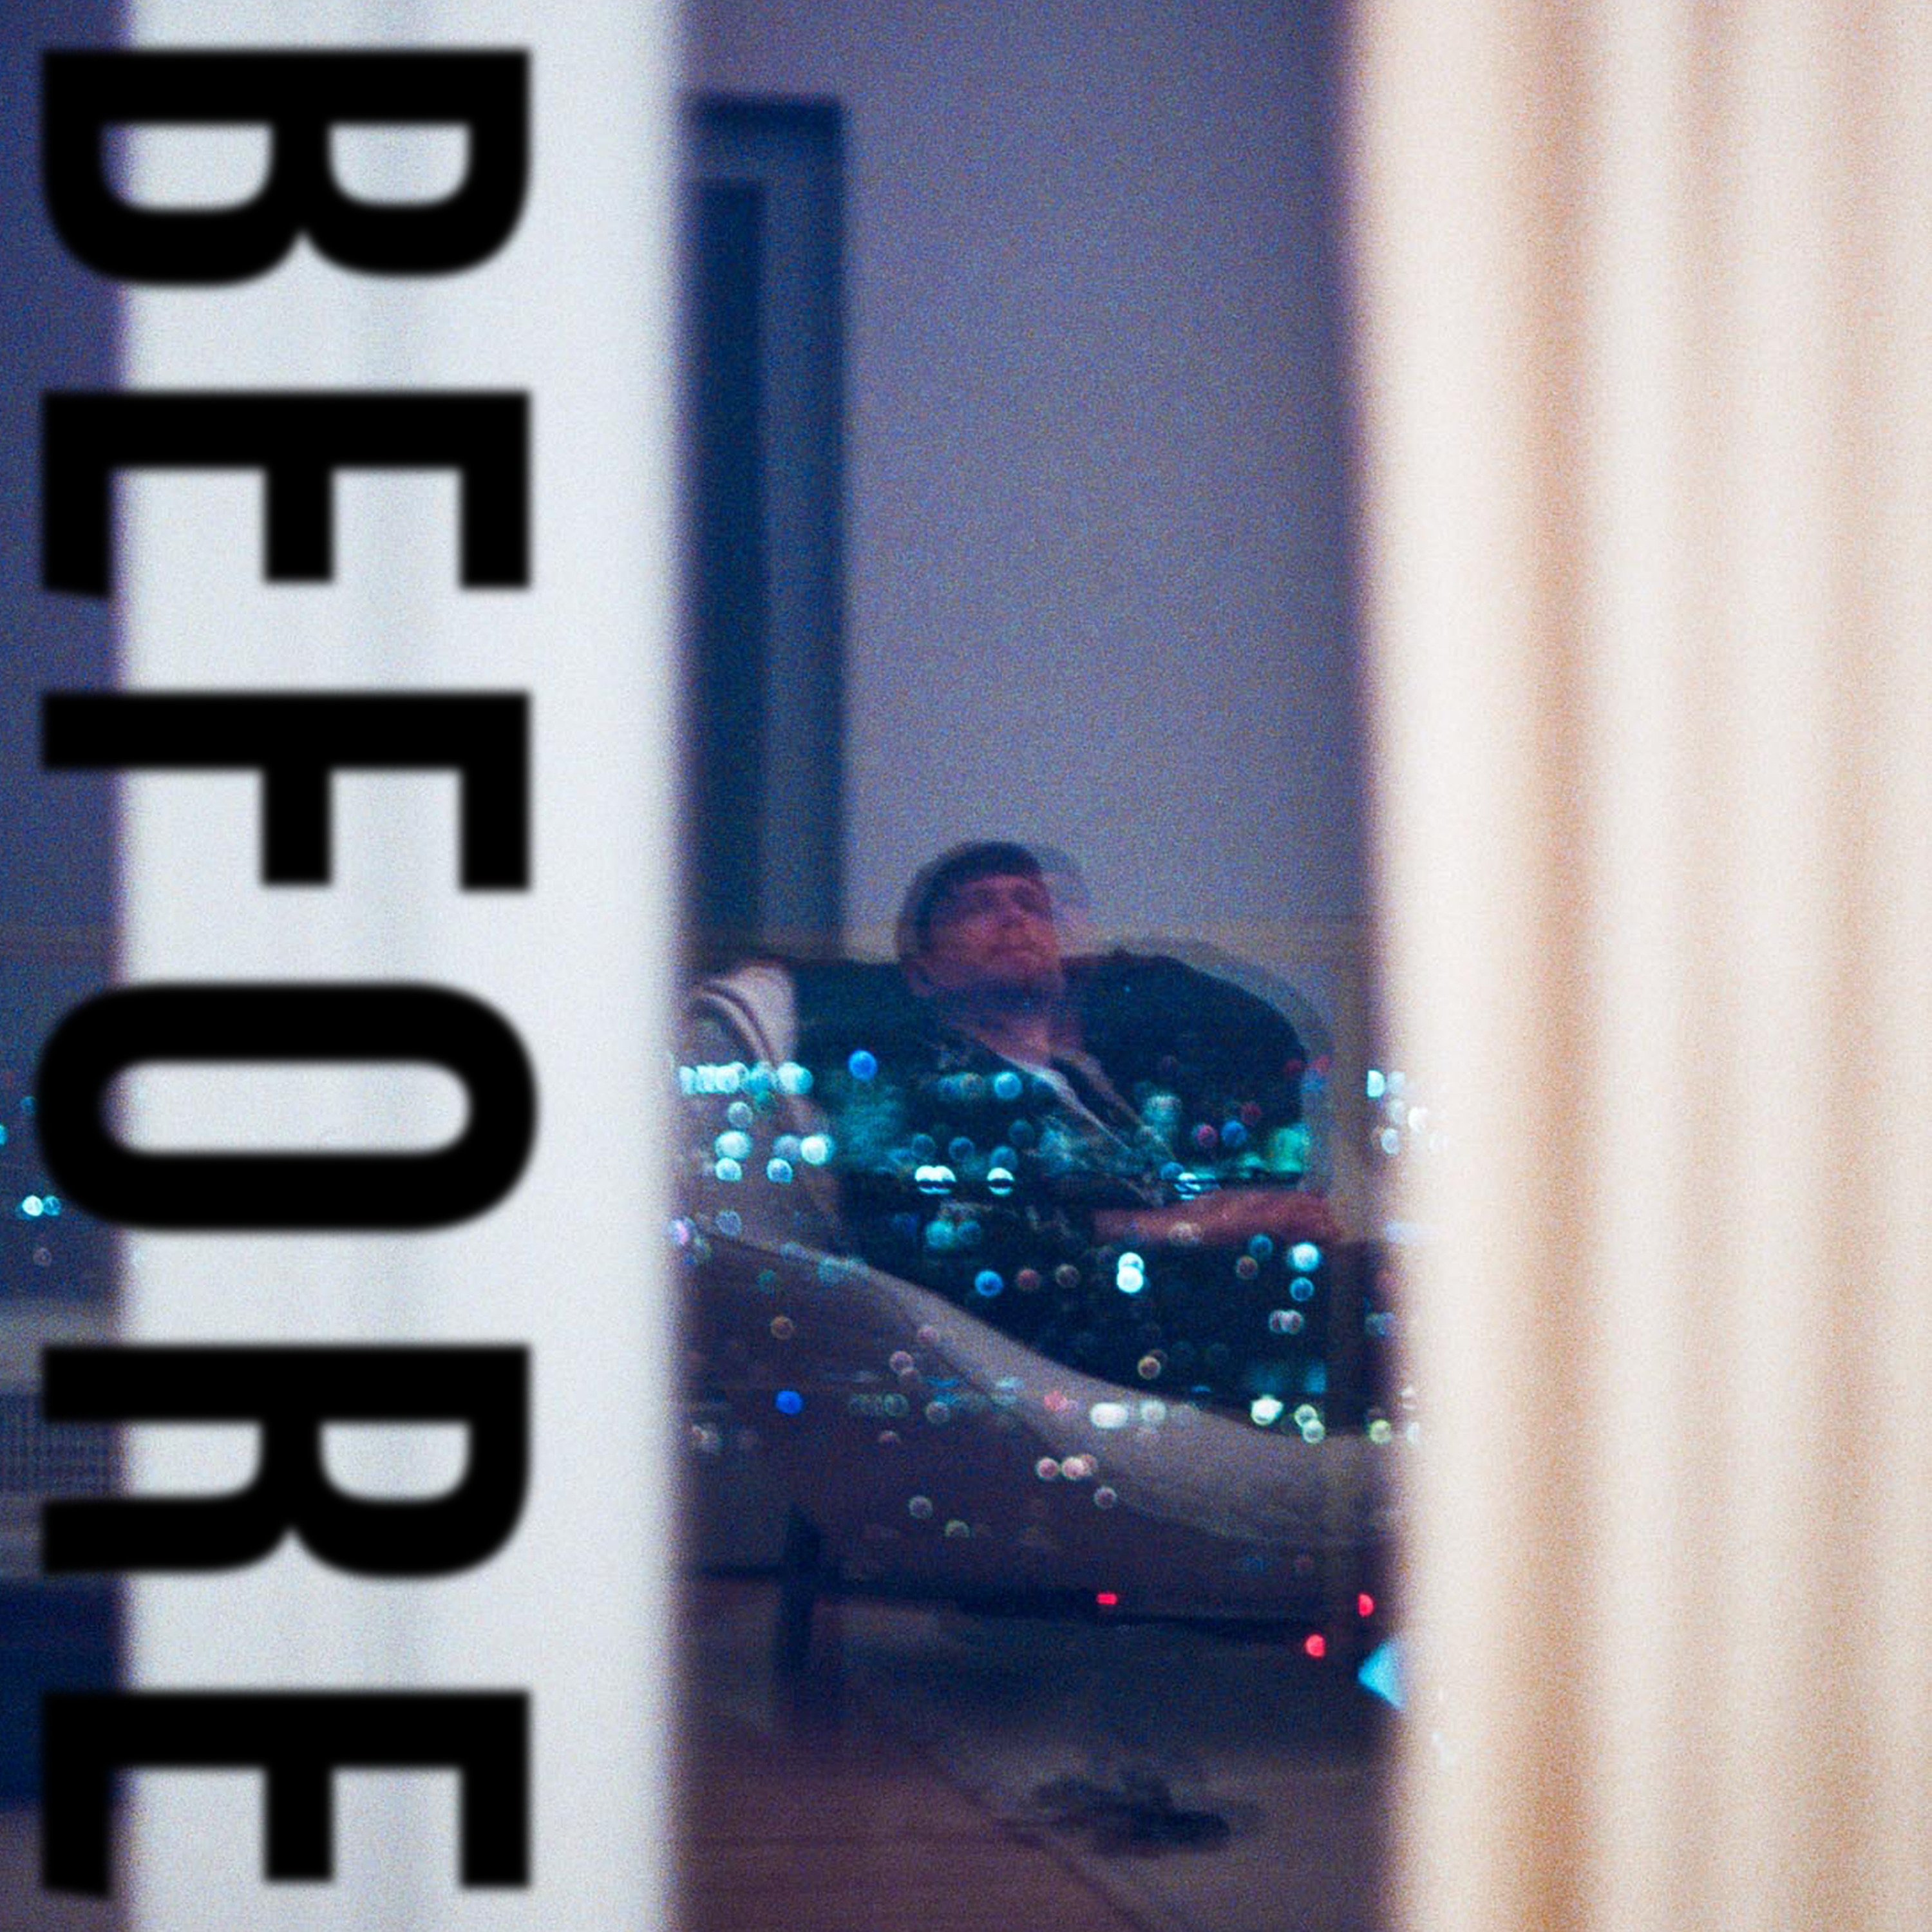 James Blake Releases New EP “Before”